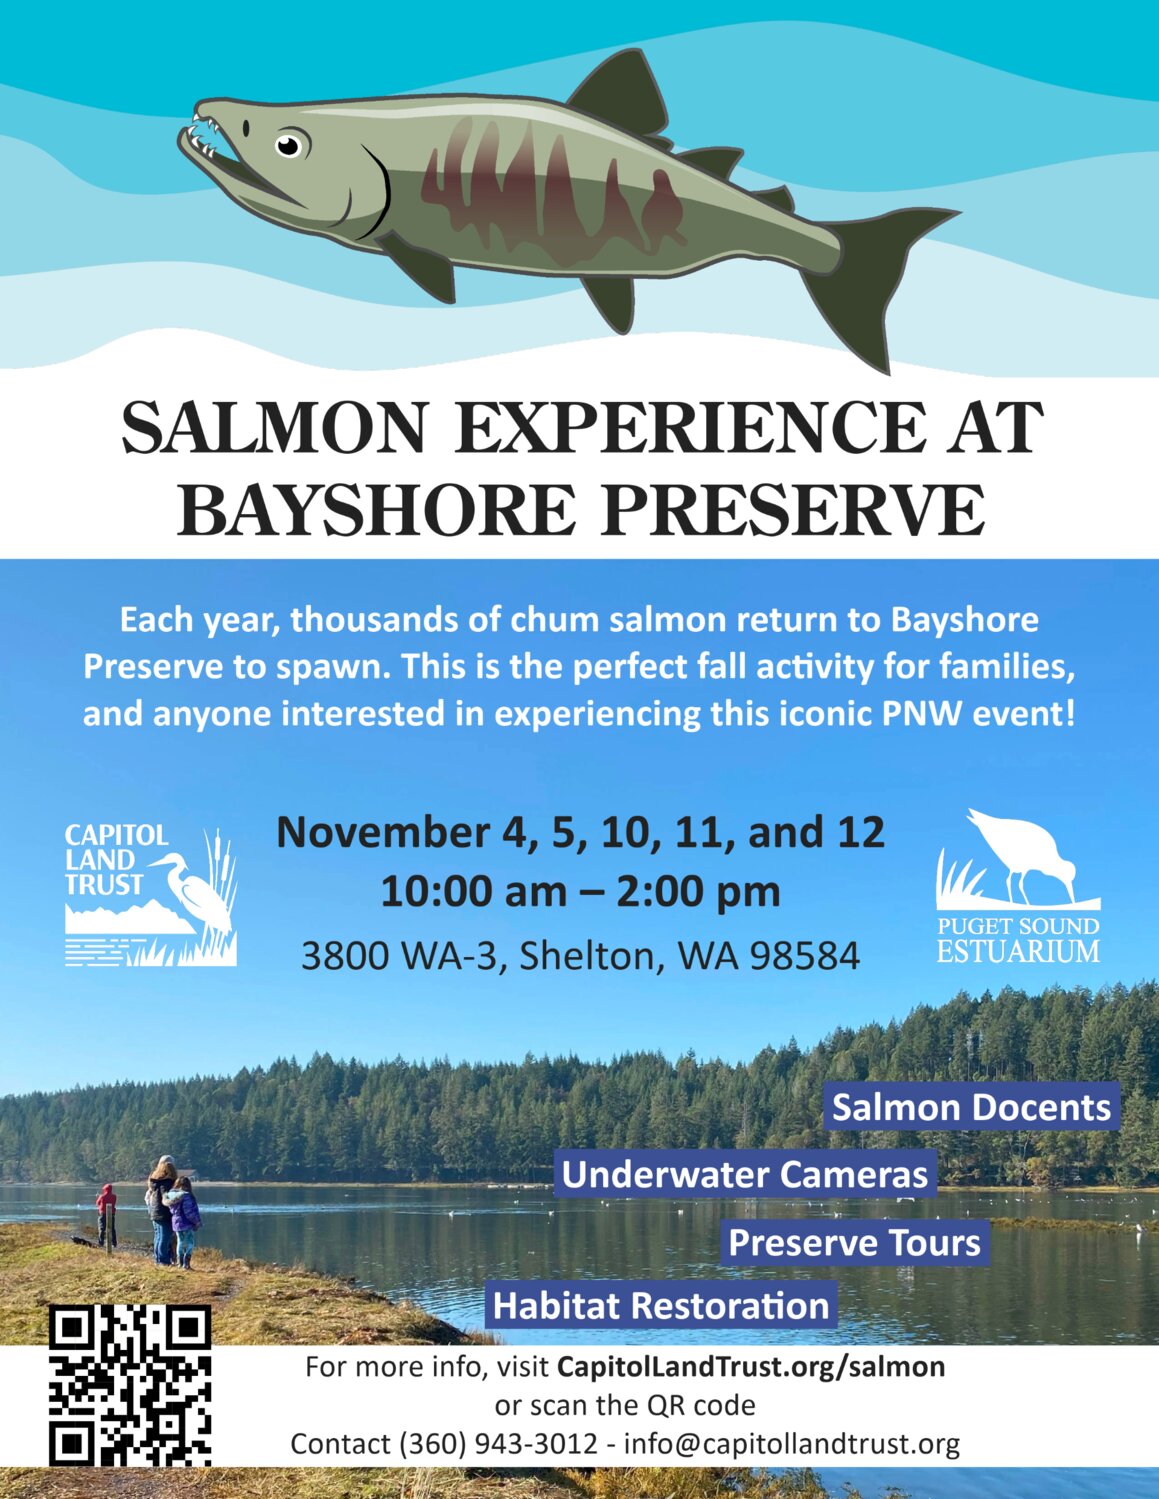 Bring your family and friends to Bayshore Preserve to witness the return and spawning of chum salmon.